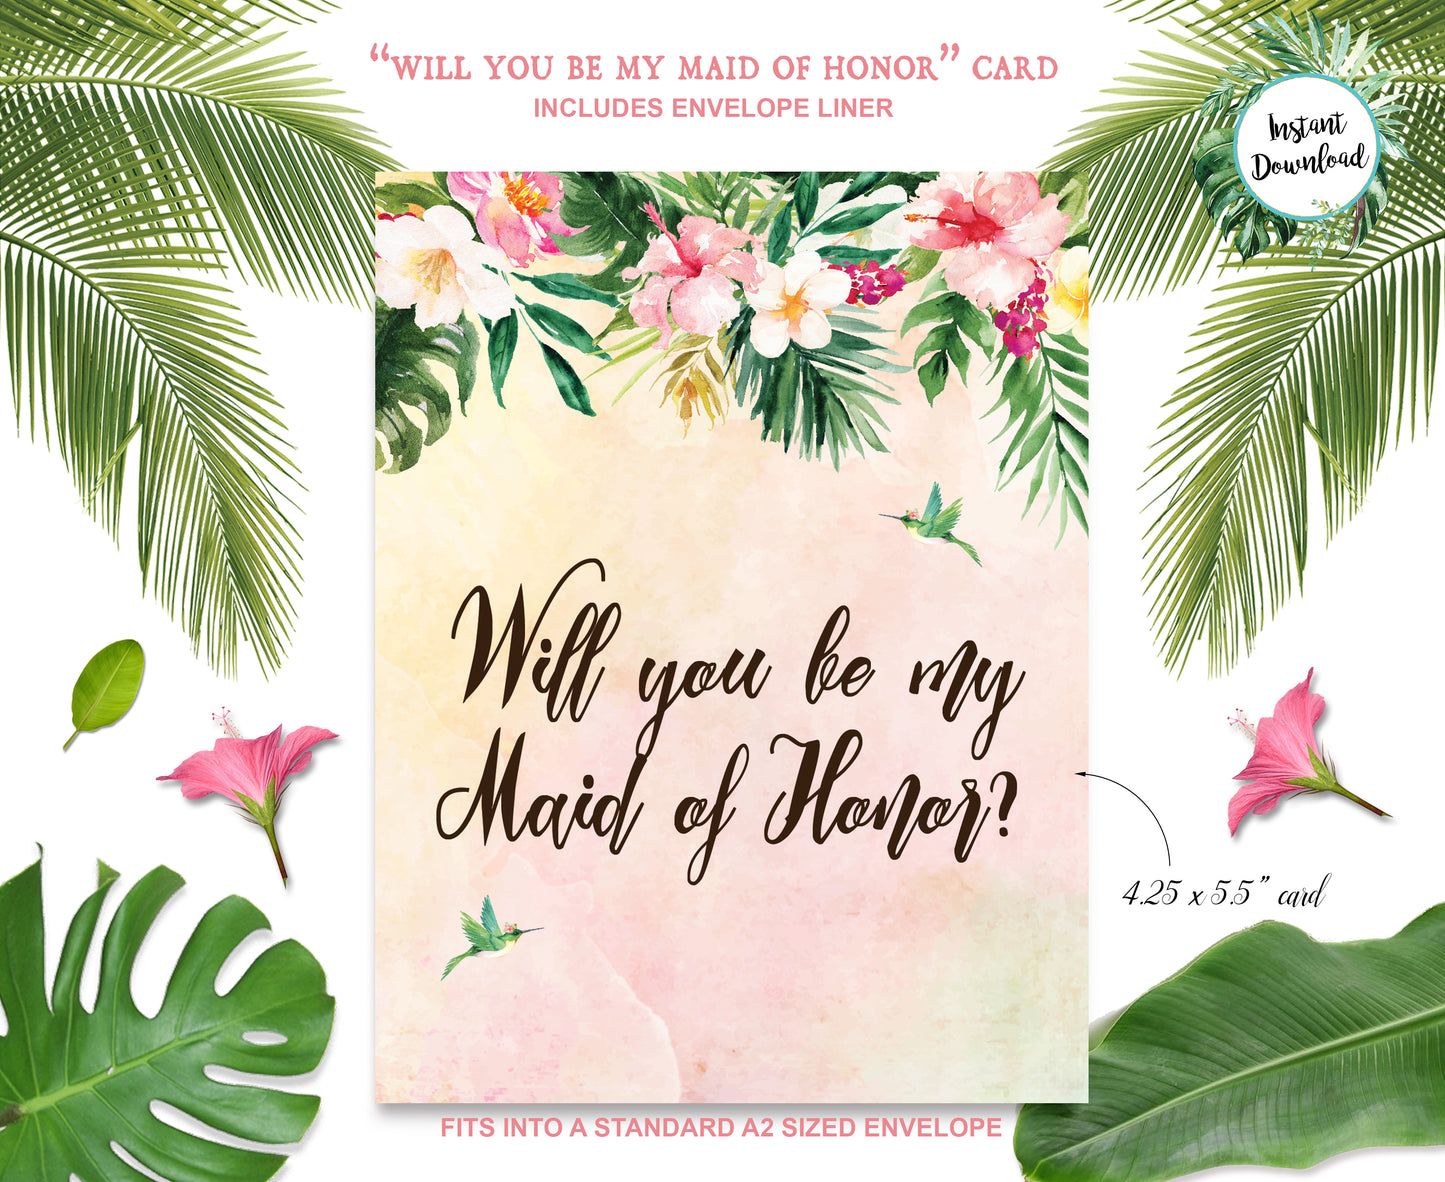 Tropical Floral Watercolor Beach Destination "Will you be my Maid of Honor" Digital "Instant Download"  Invitation 4 - 'TROPICAL LUSH"